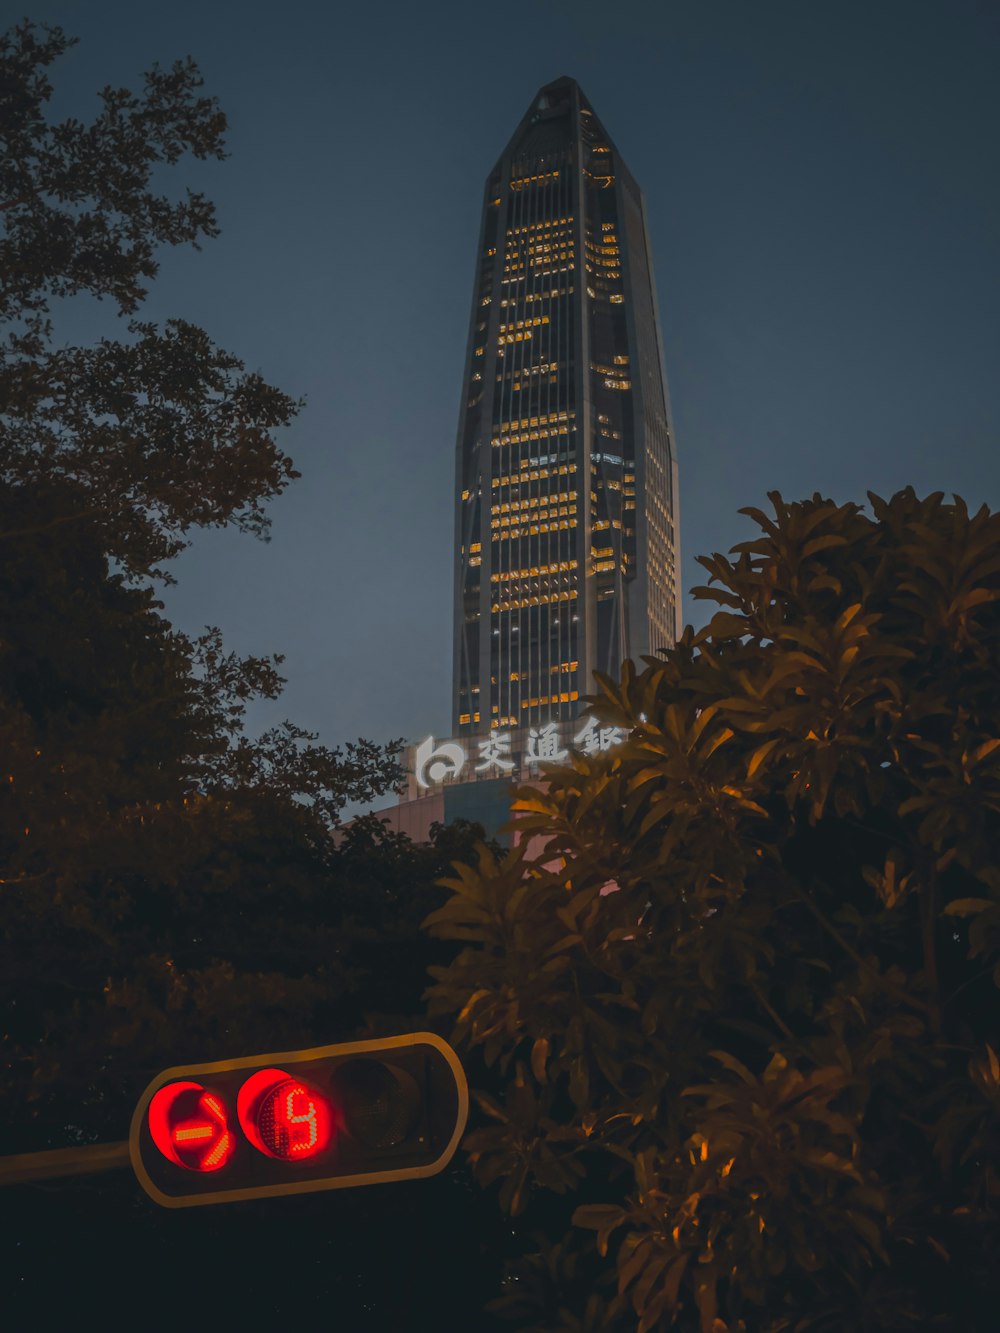 a traffic light in front of a tall building